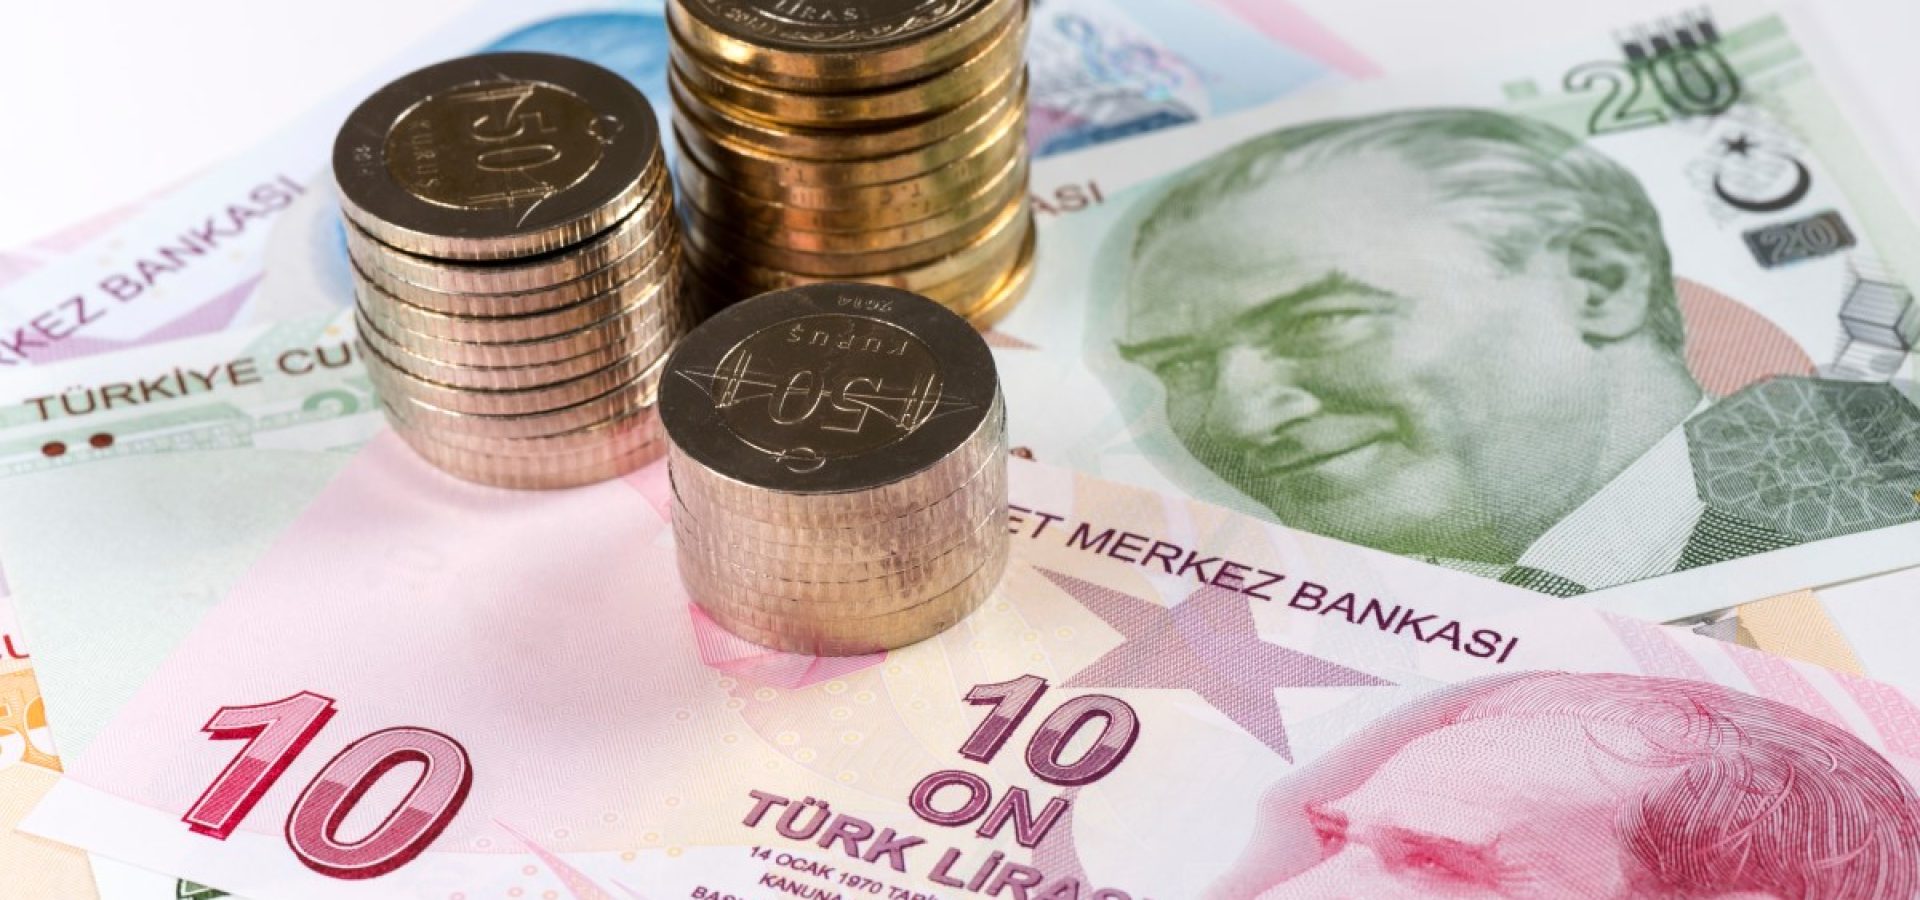 forex: Lira Fell to Record Lows Following Erdogan’s Comments